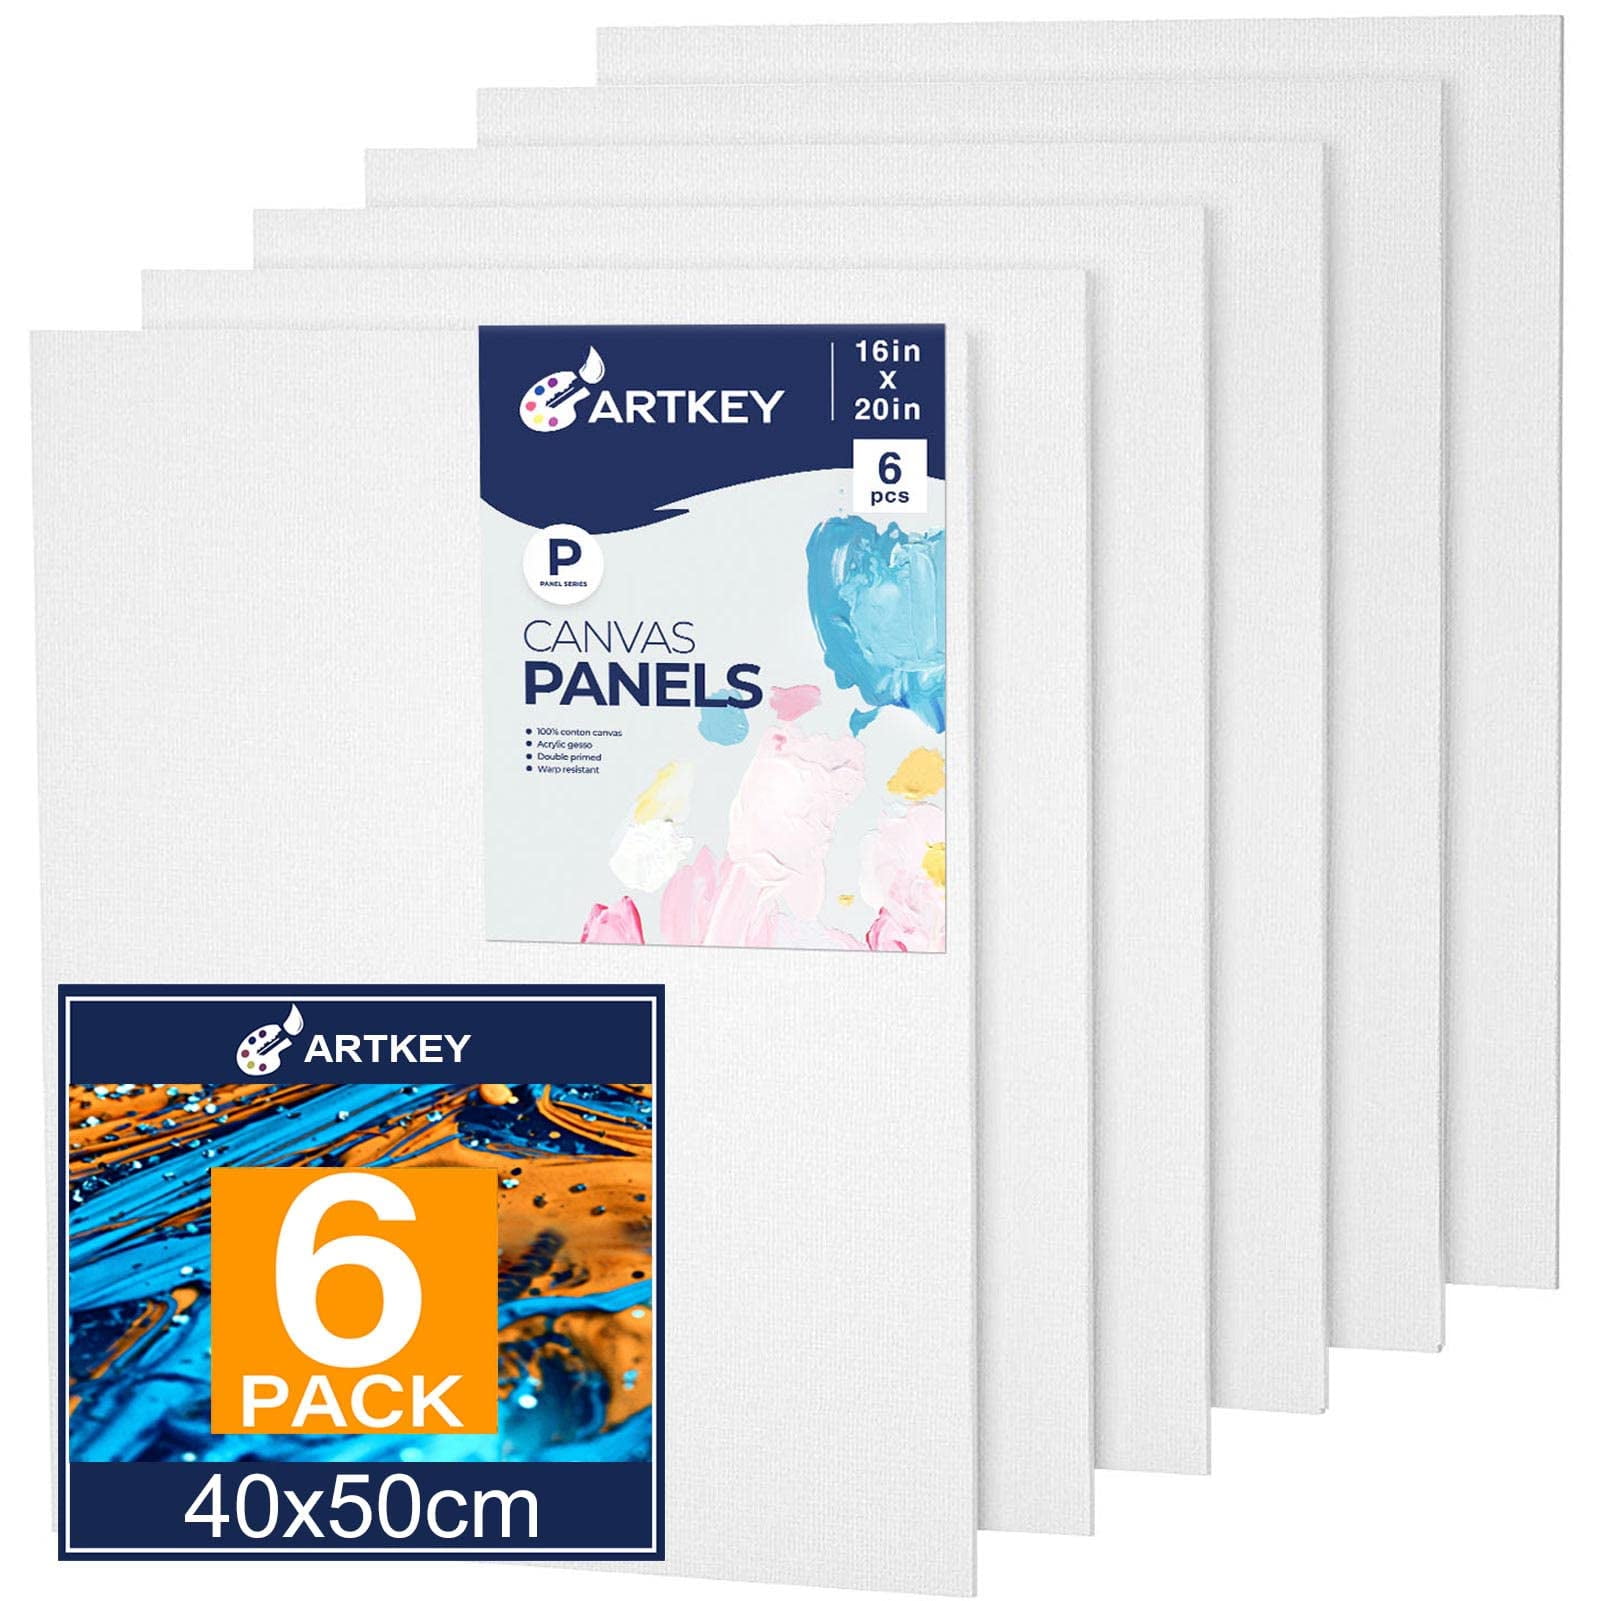 Artkey Canvas Panels 28x36cm 12-Pack, 300 GSM Triple Primed Acid-Free 100% Cotton Paint Canvas for Painting, Blank Flat Canvas Board for Acrylics Oil